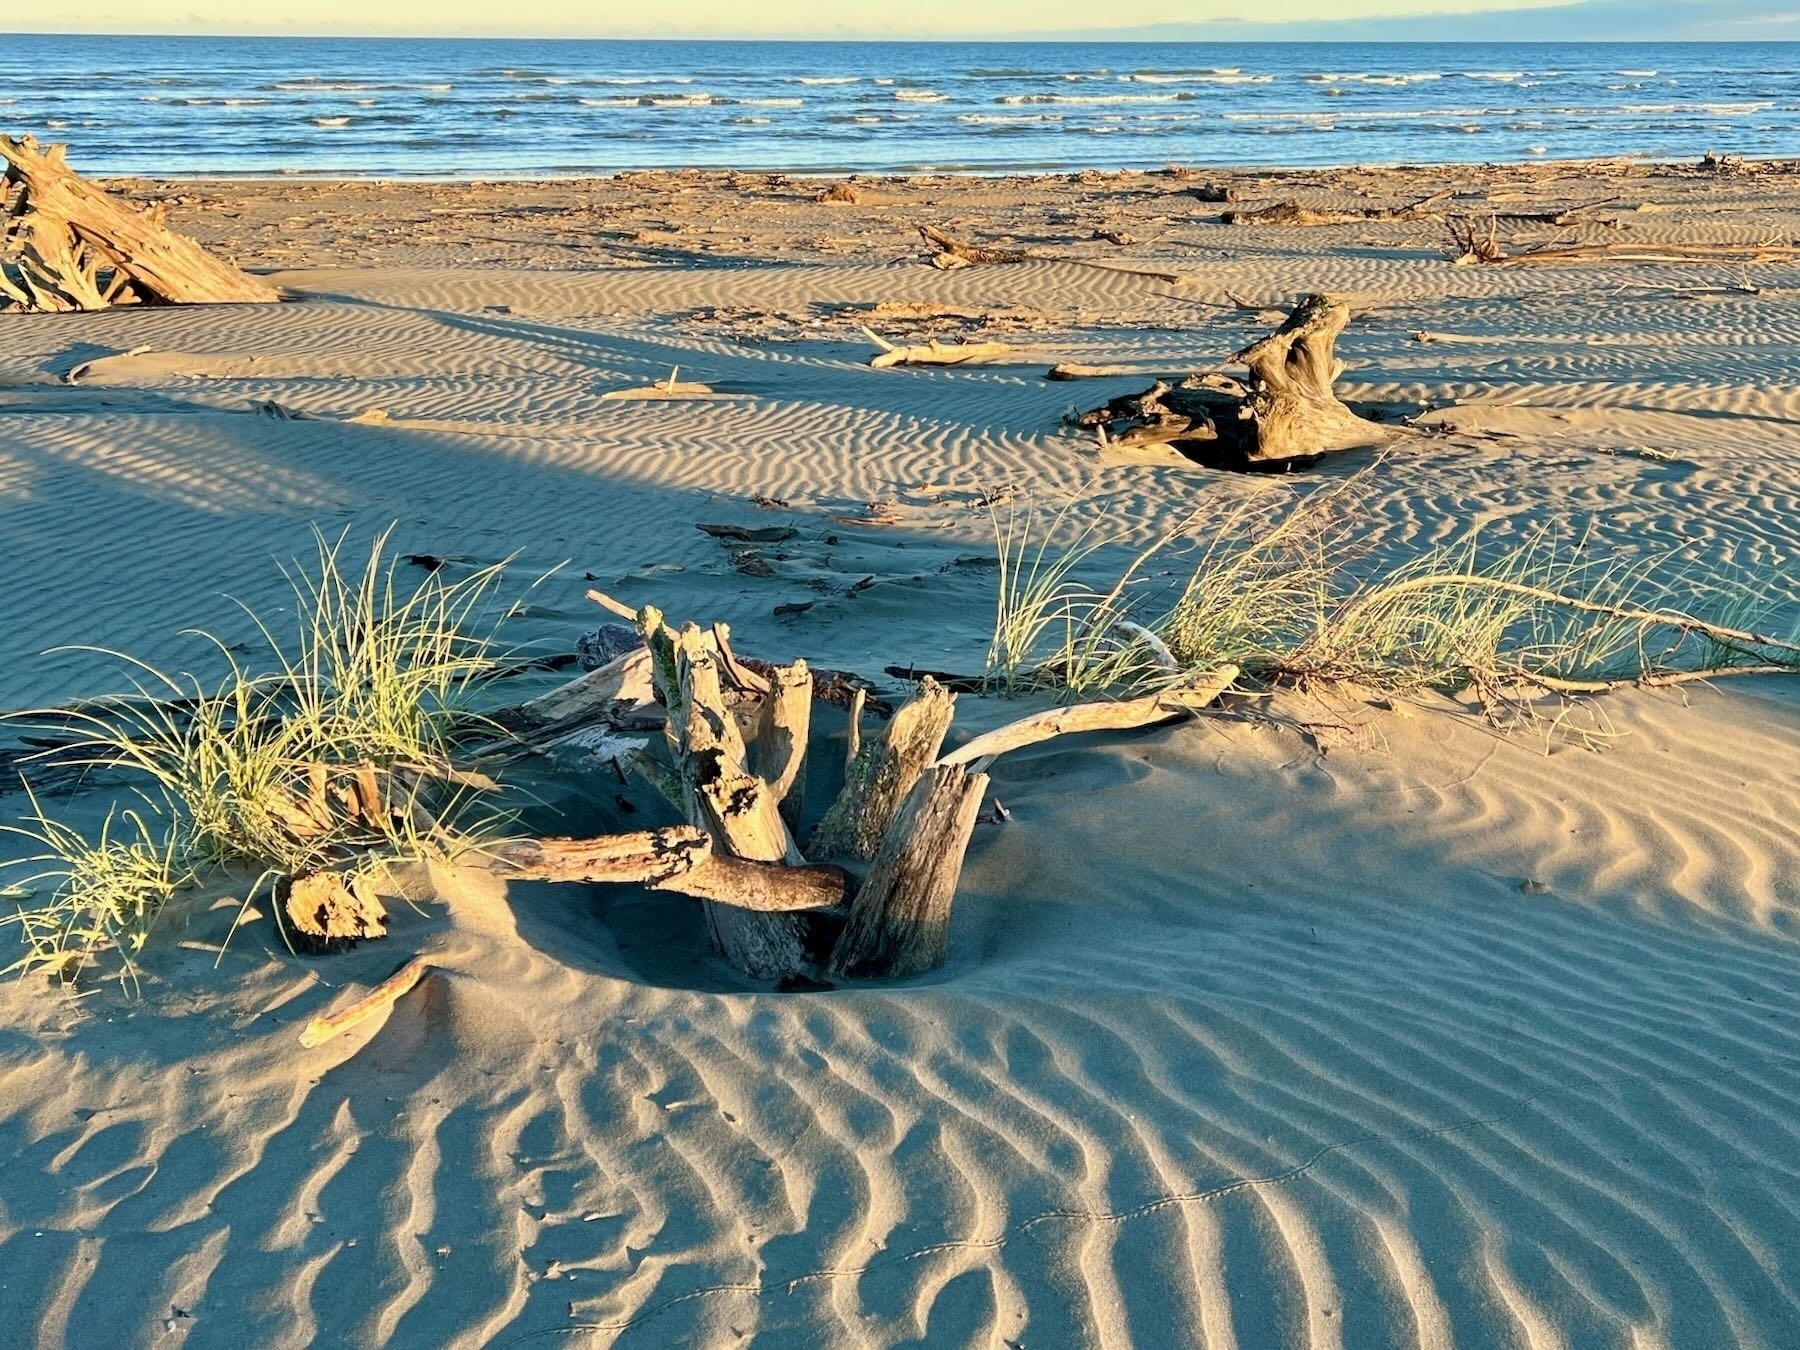 New spinifex growth around a large piece of driftwood buried in sand. 